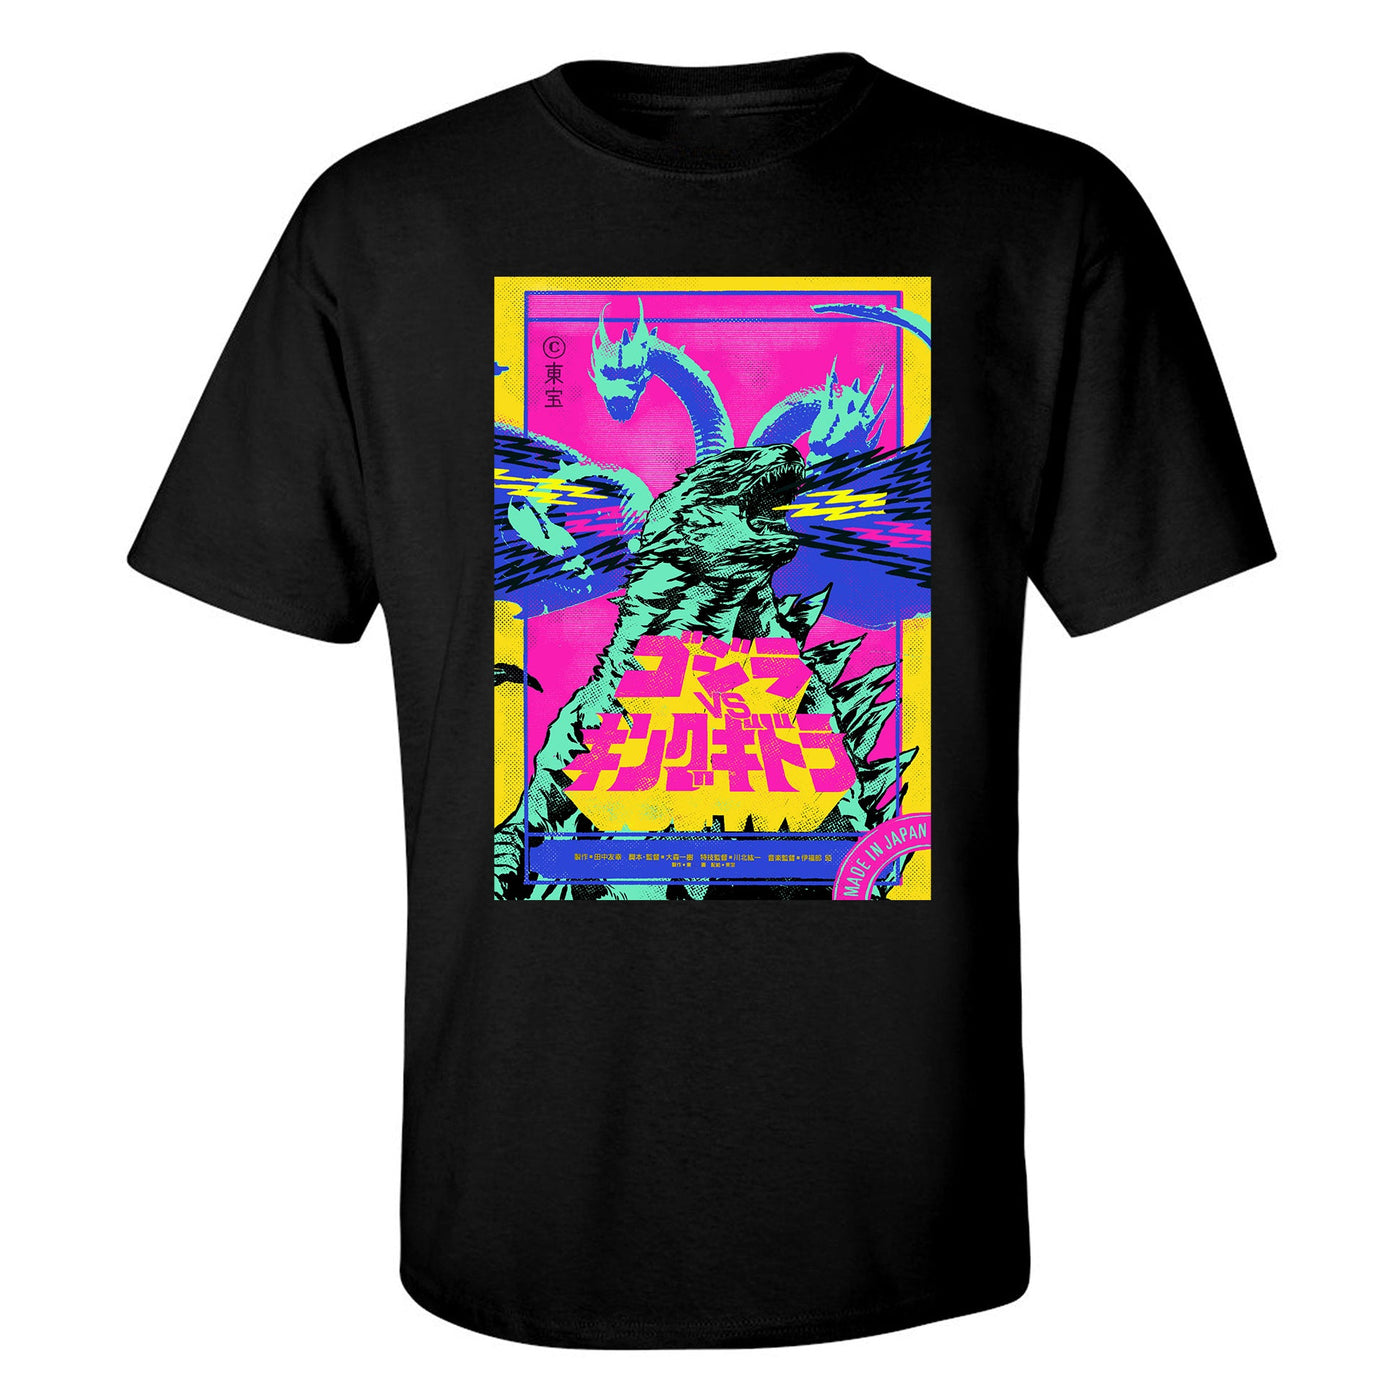 "King of the Monsters Poster" Short Sleeve T-Shirt